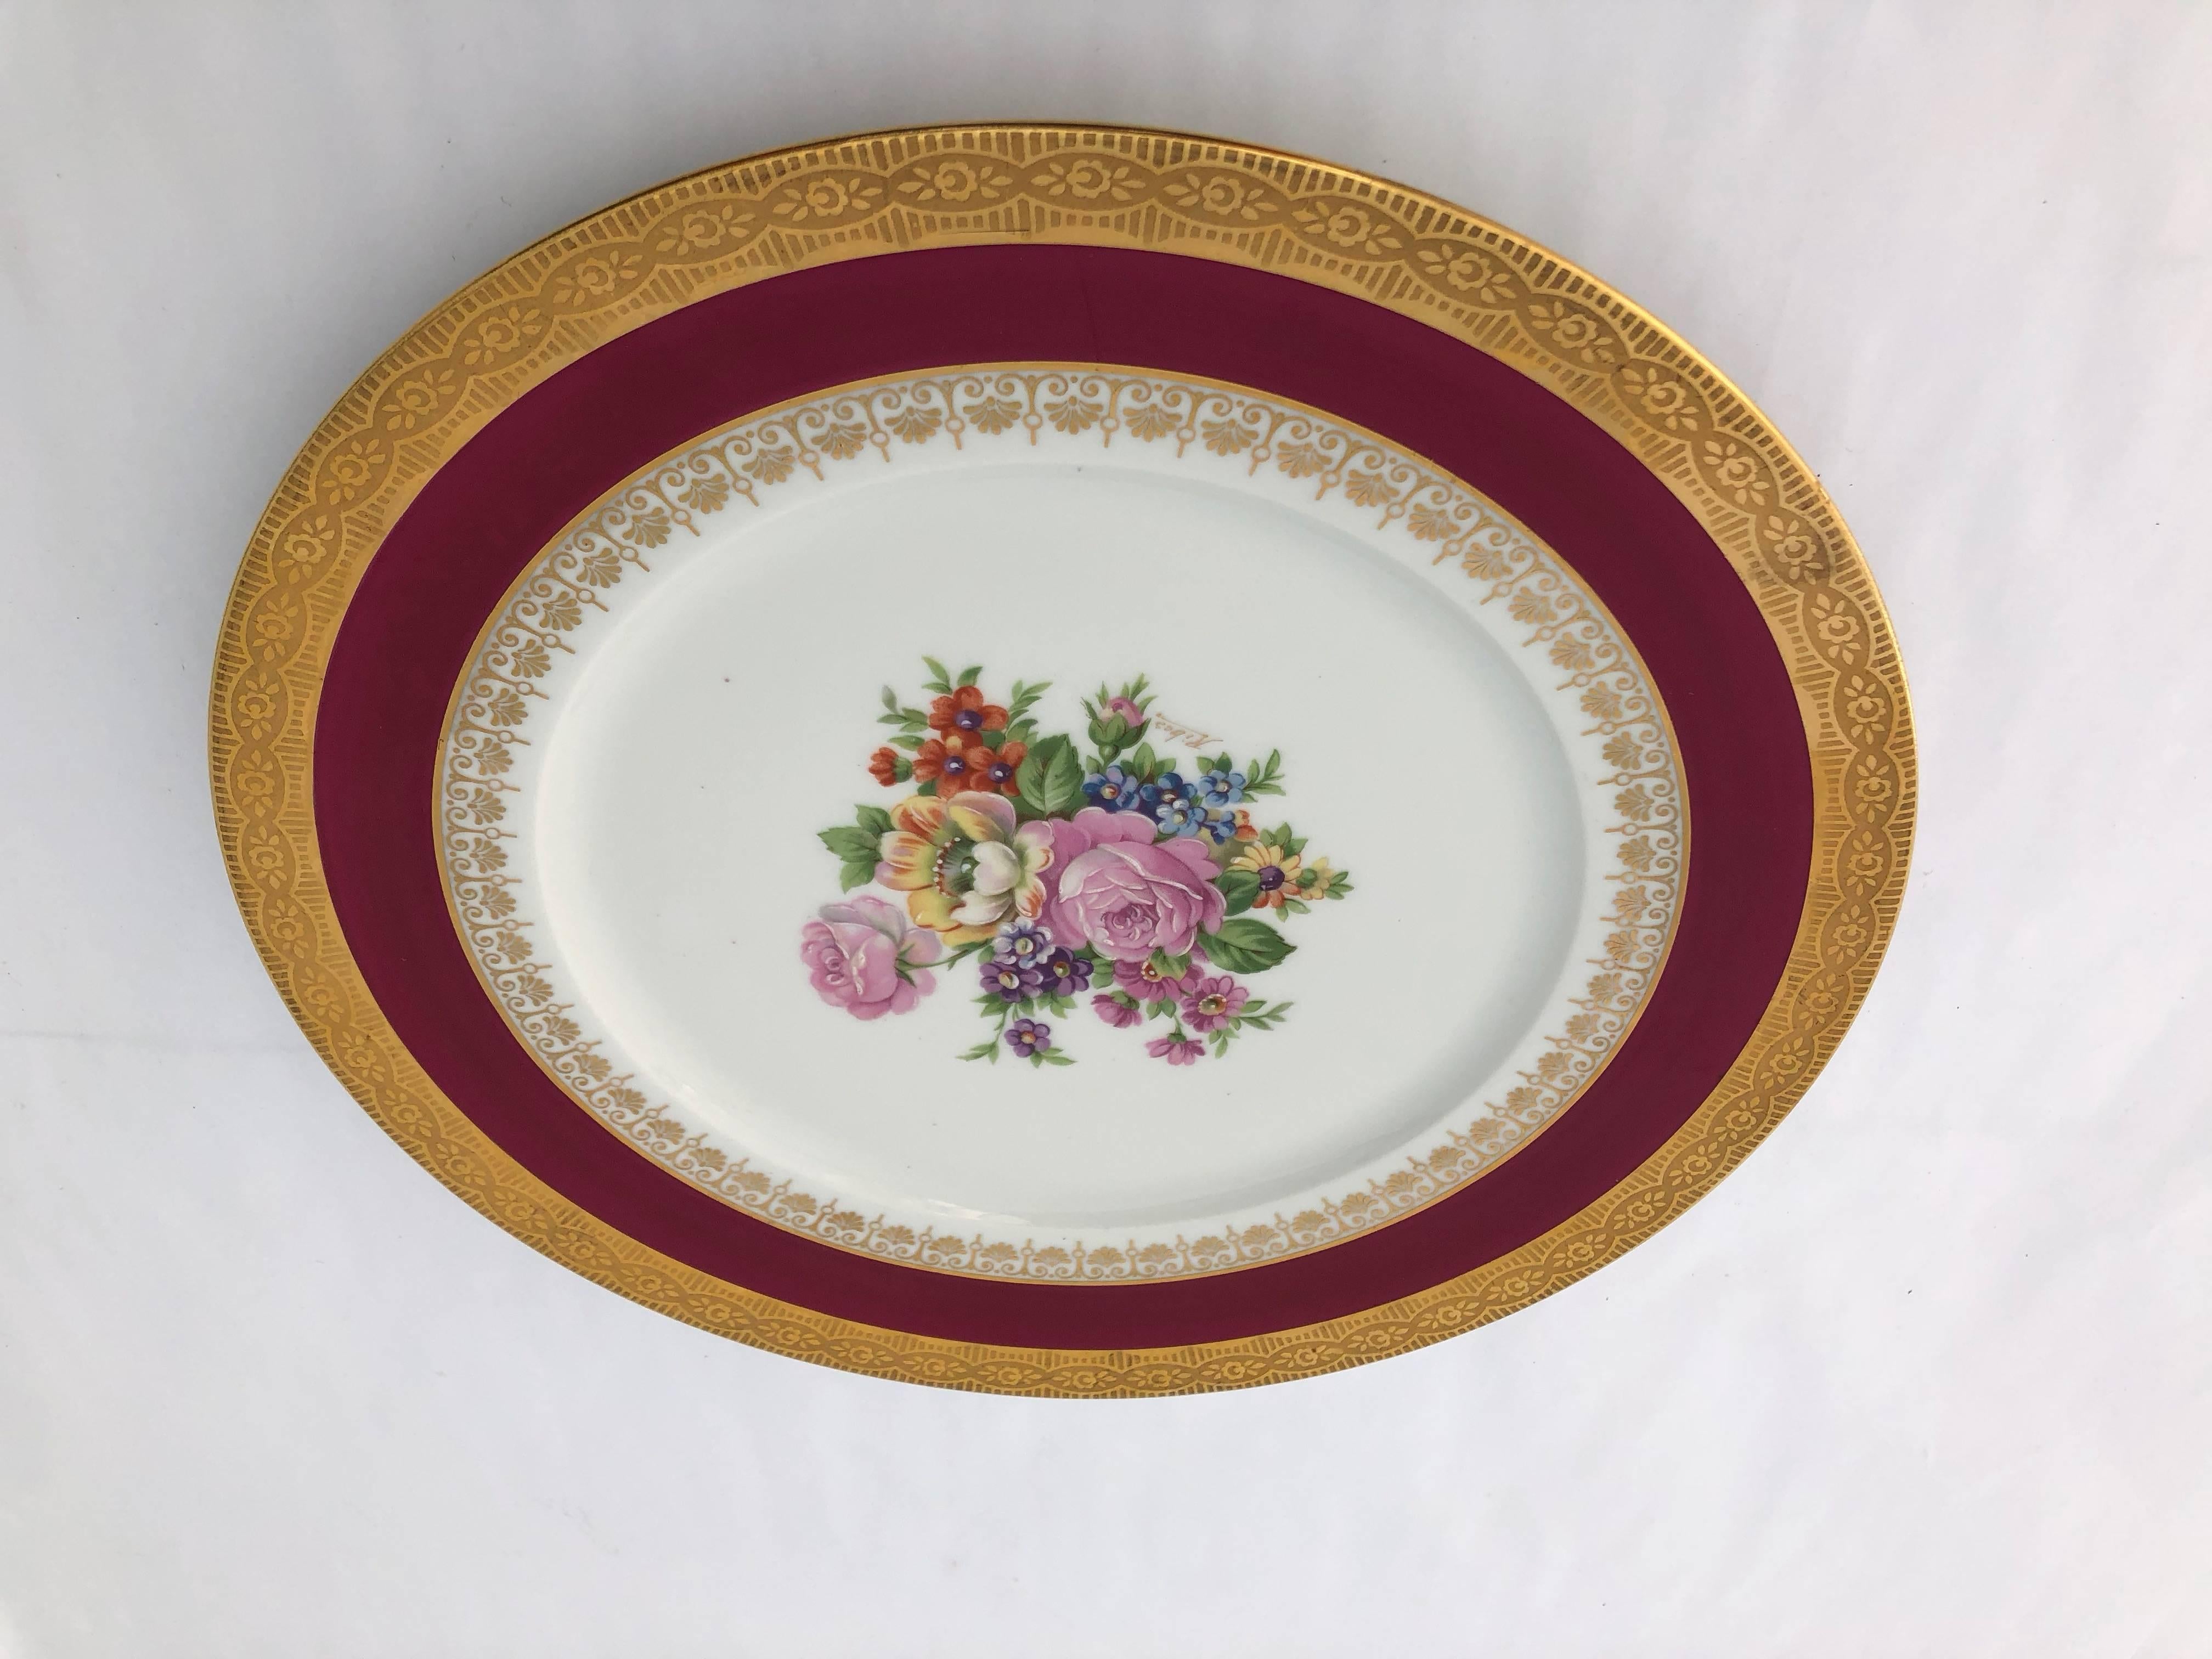 2 French Limoges Serving Plates, Hand-Painted Red, Gold with Decorative Flowers For Sale 3